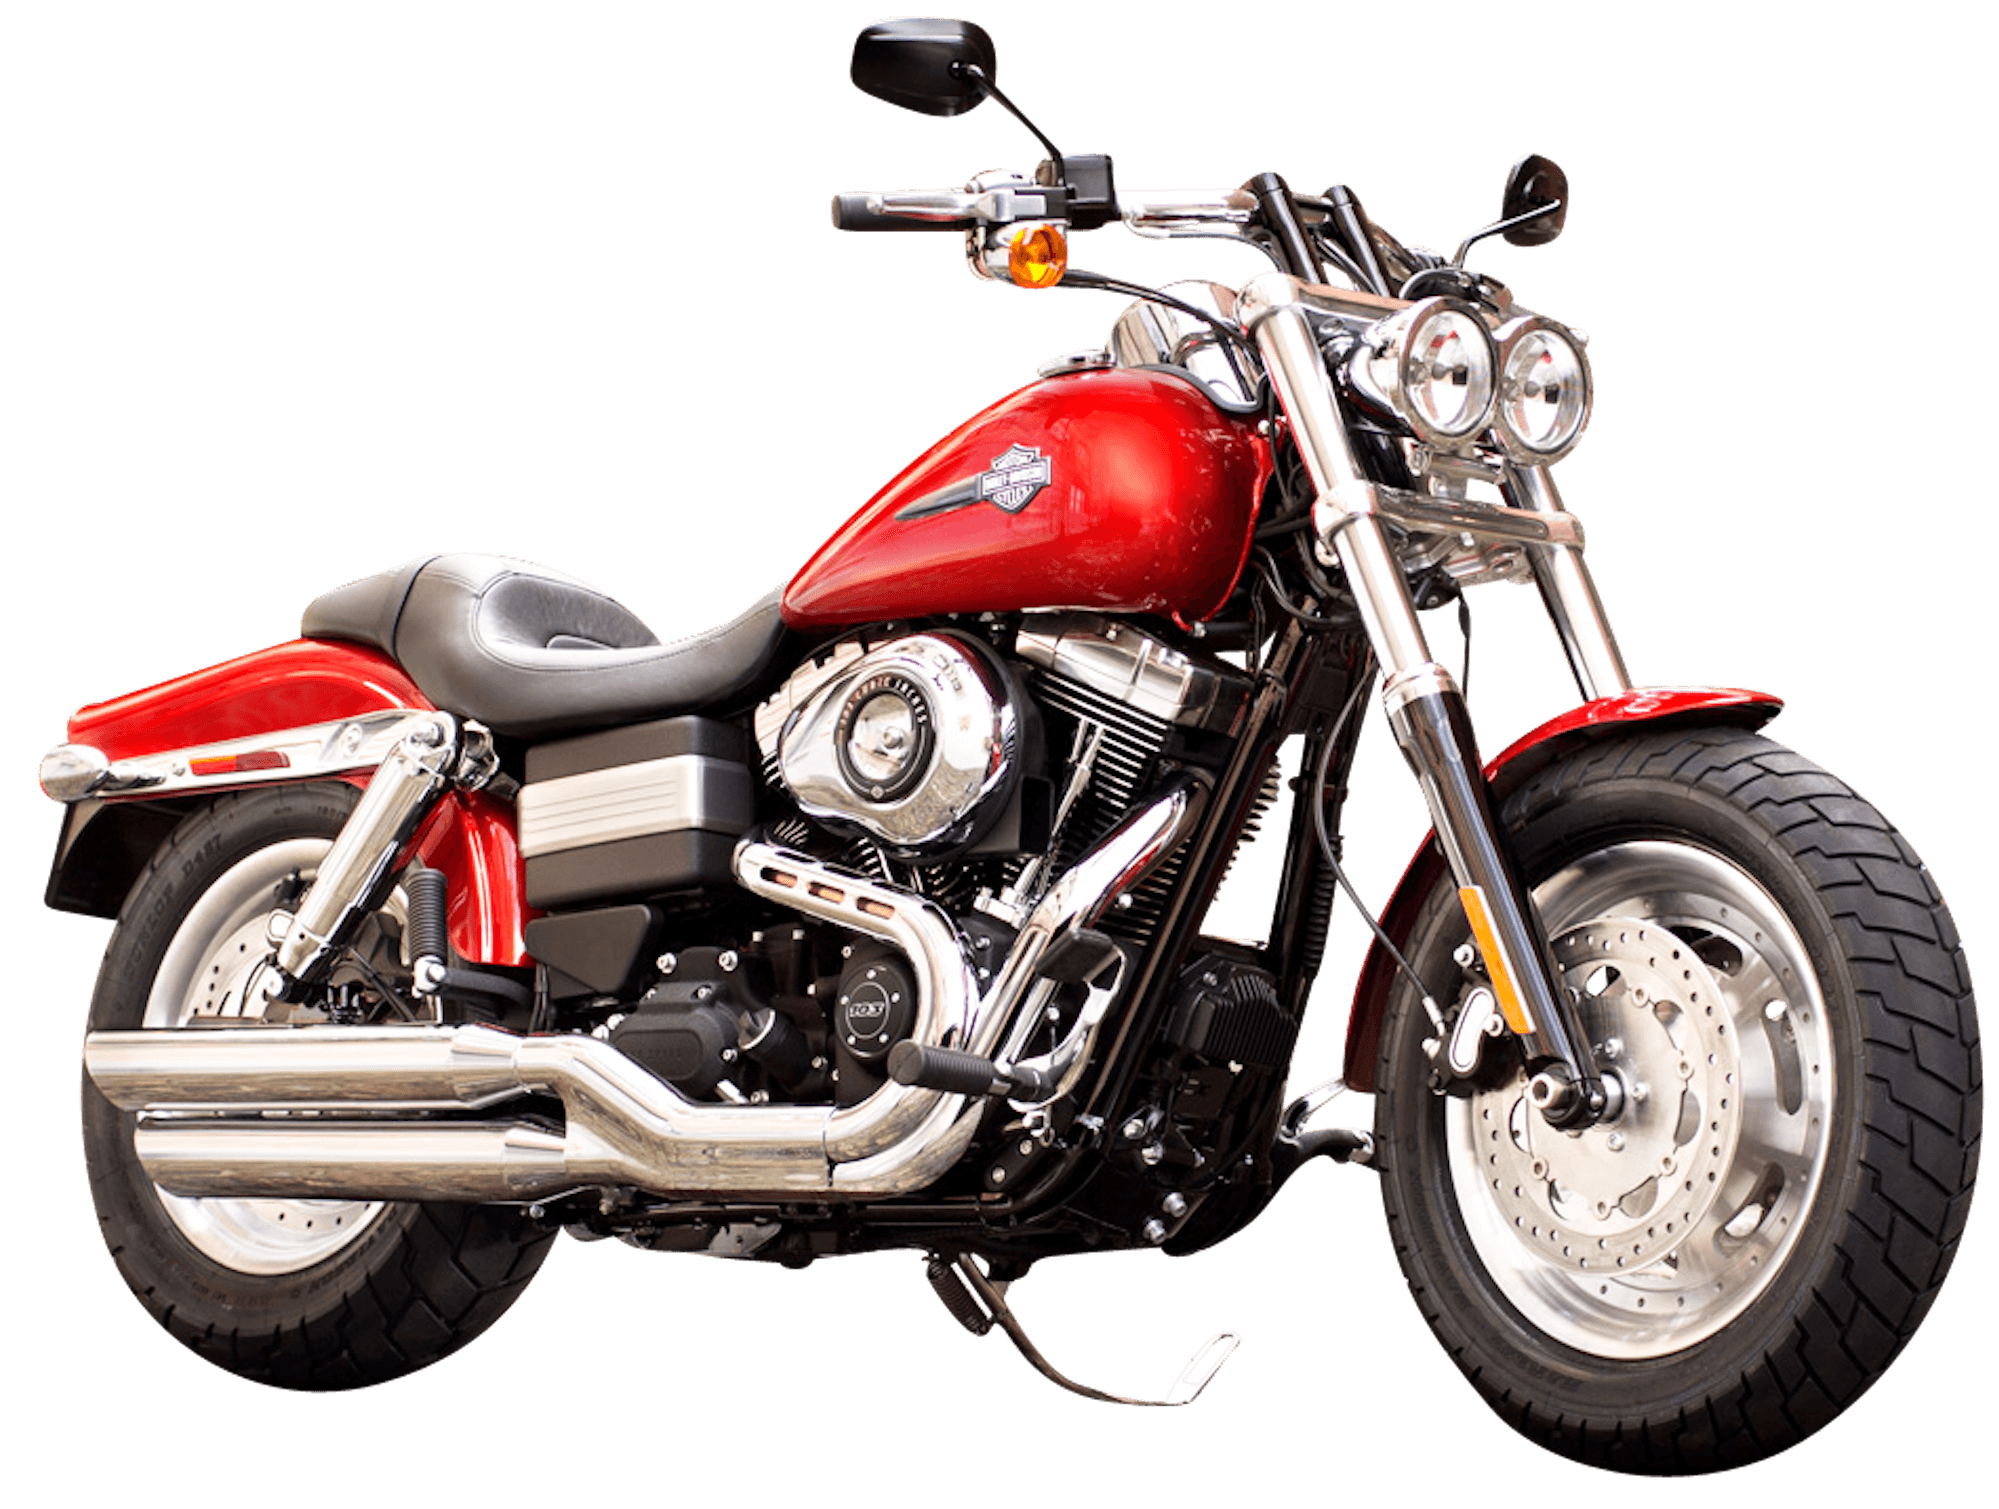 Find your best Harley Davidson finance rate with Driva